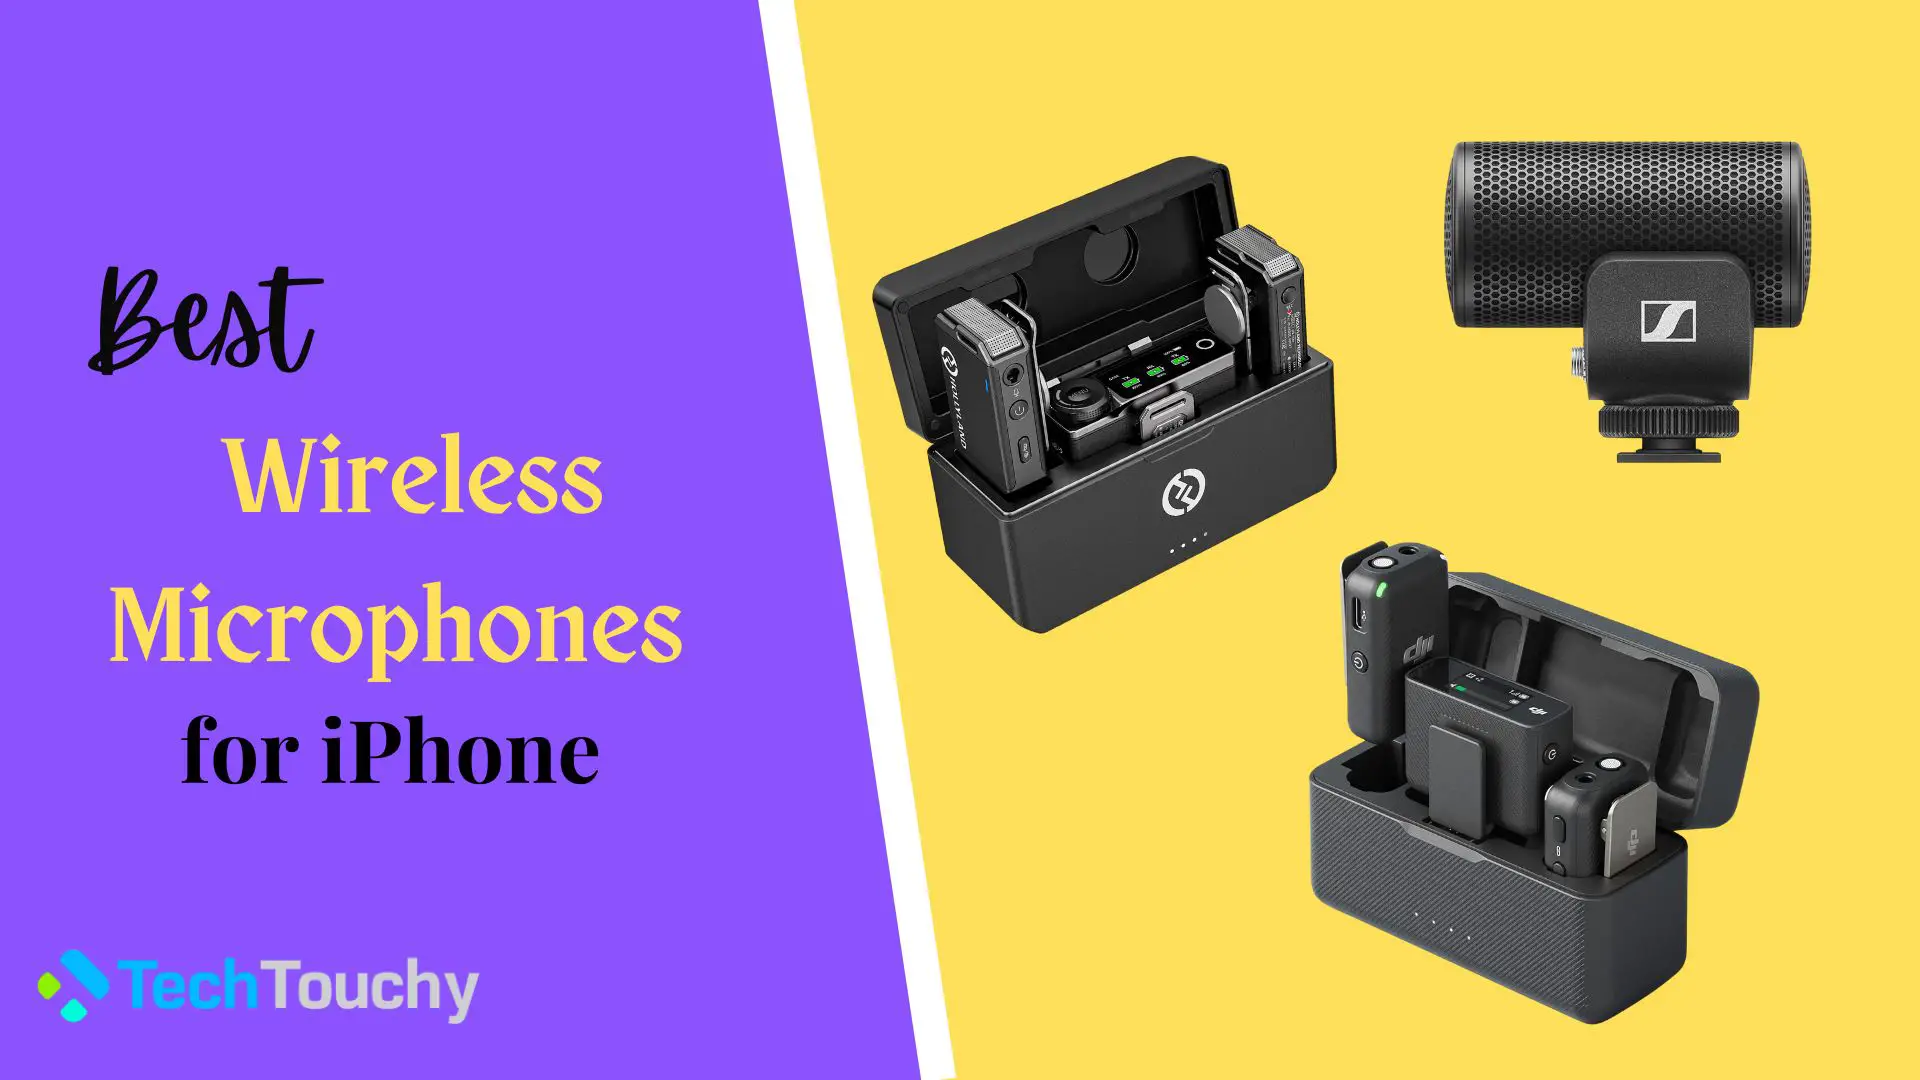 Best Wireless Microphones for iPhone